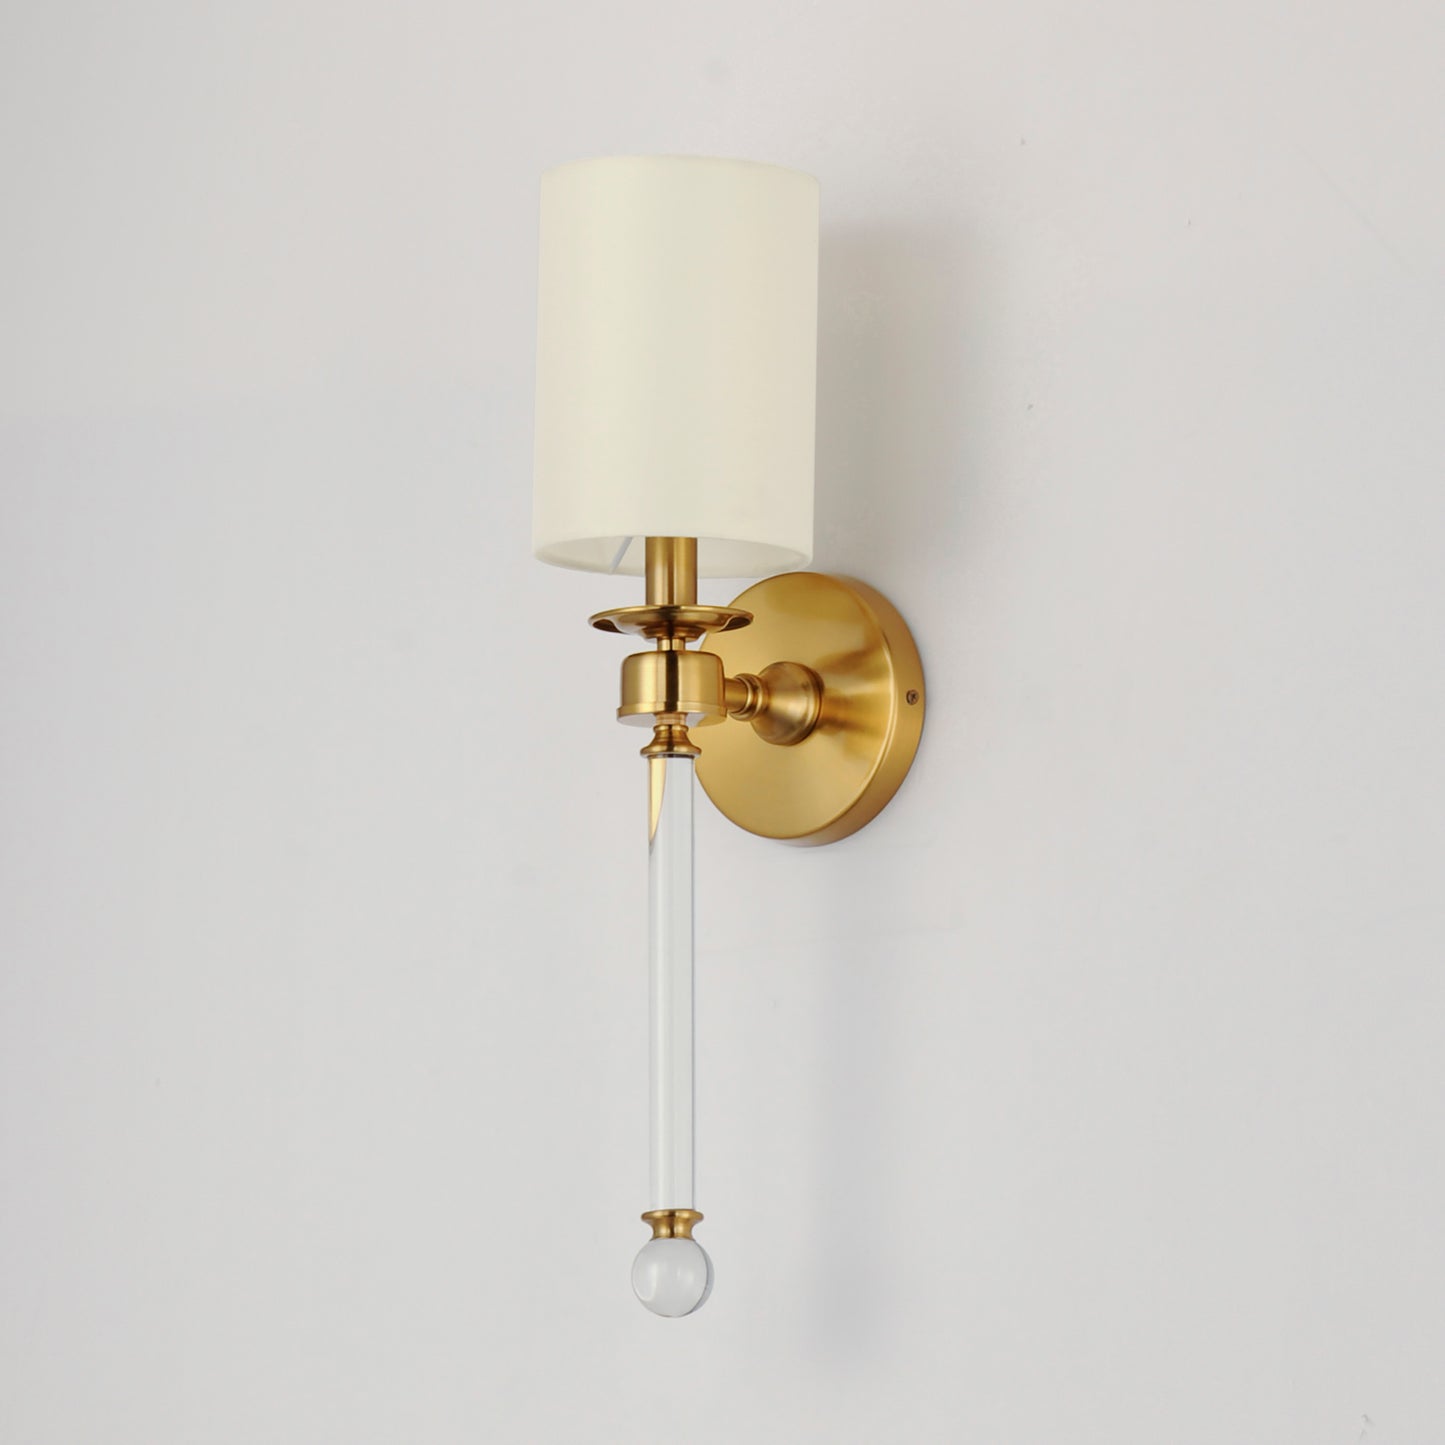 16109WTCLHR - 1 Light Lucent 5" Wall Sconce - Heritage Brass